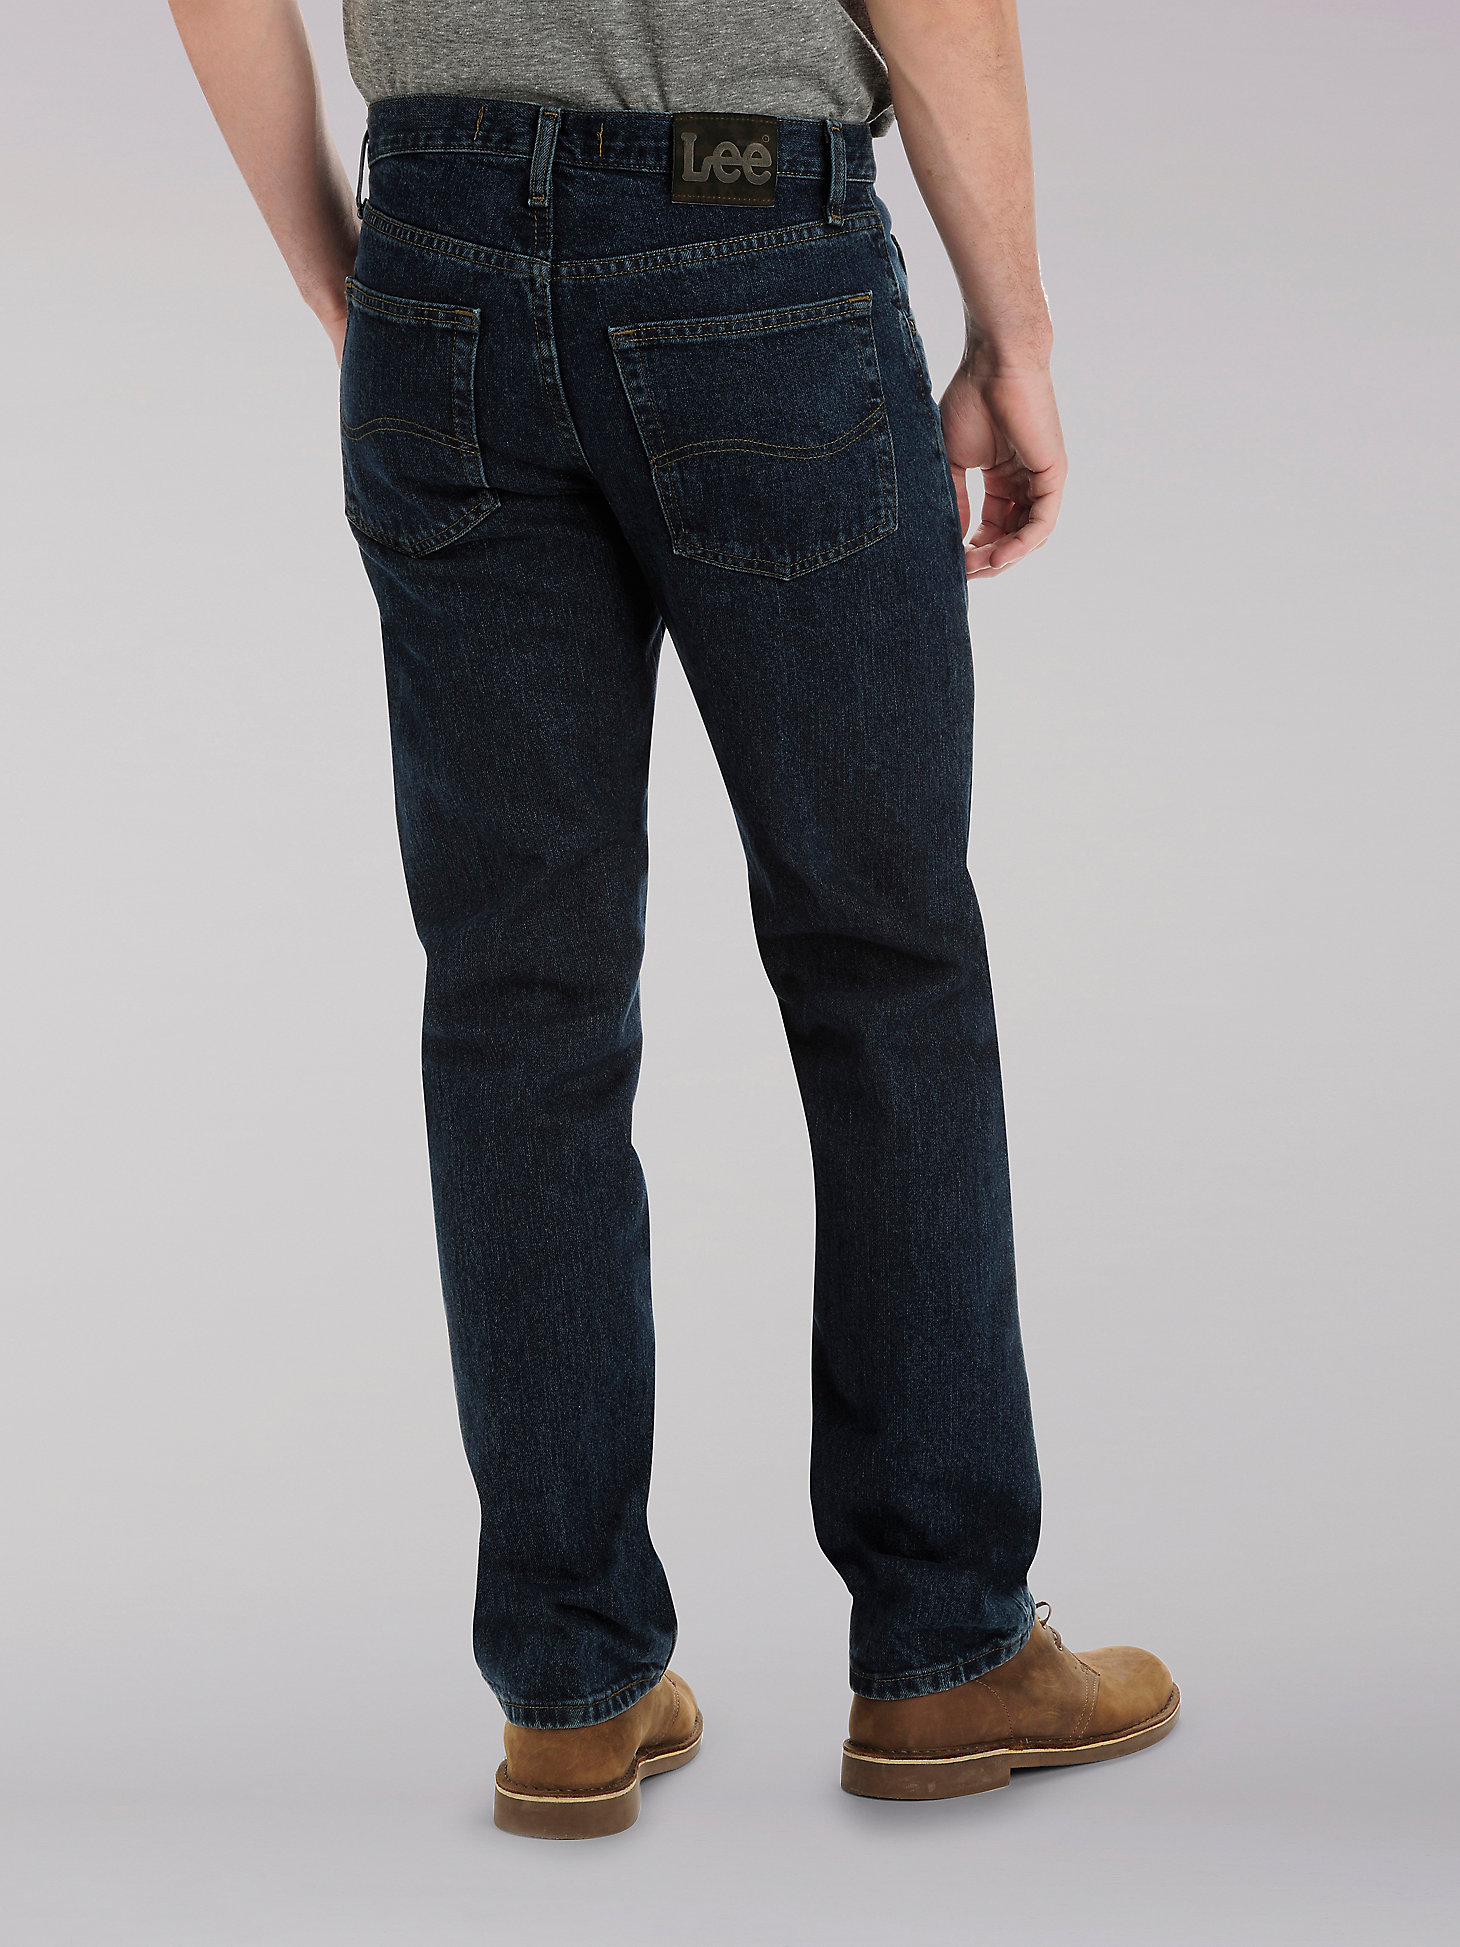 Mens BIG SIZE Regular Fit Hard Wearing Jeans By Denim and Dye Straight Leg